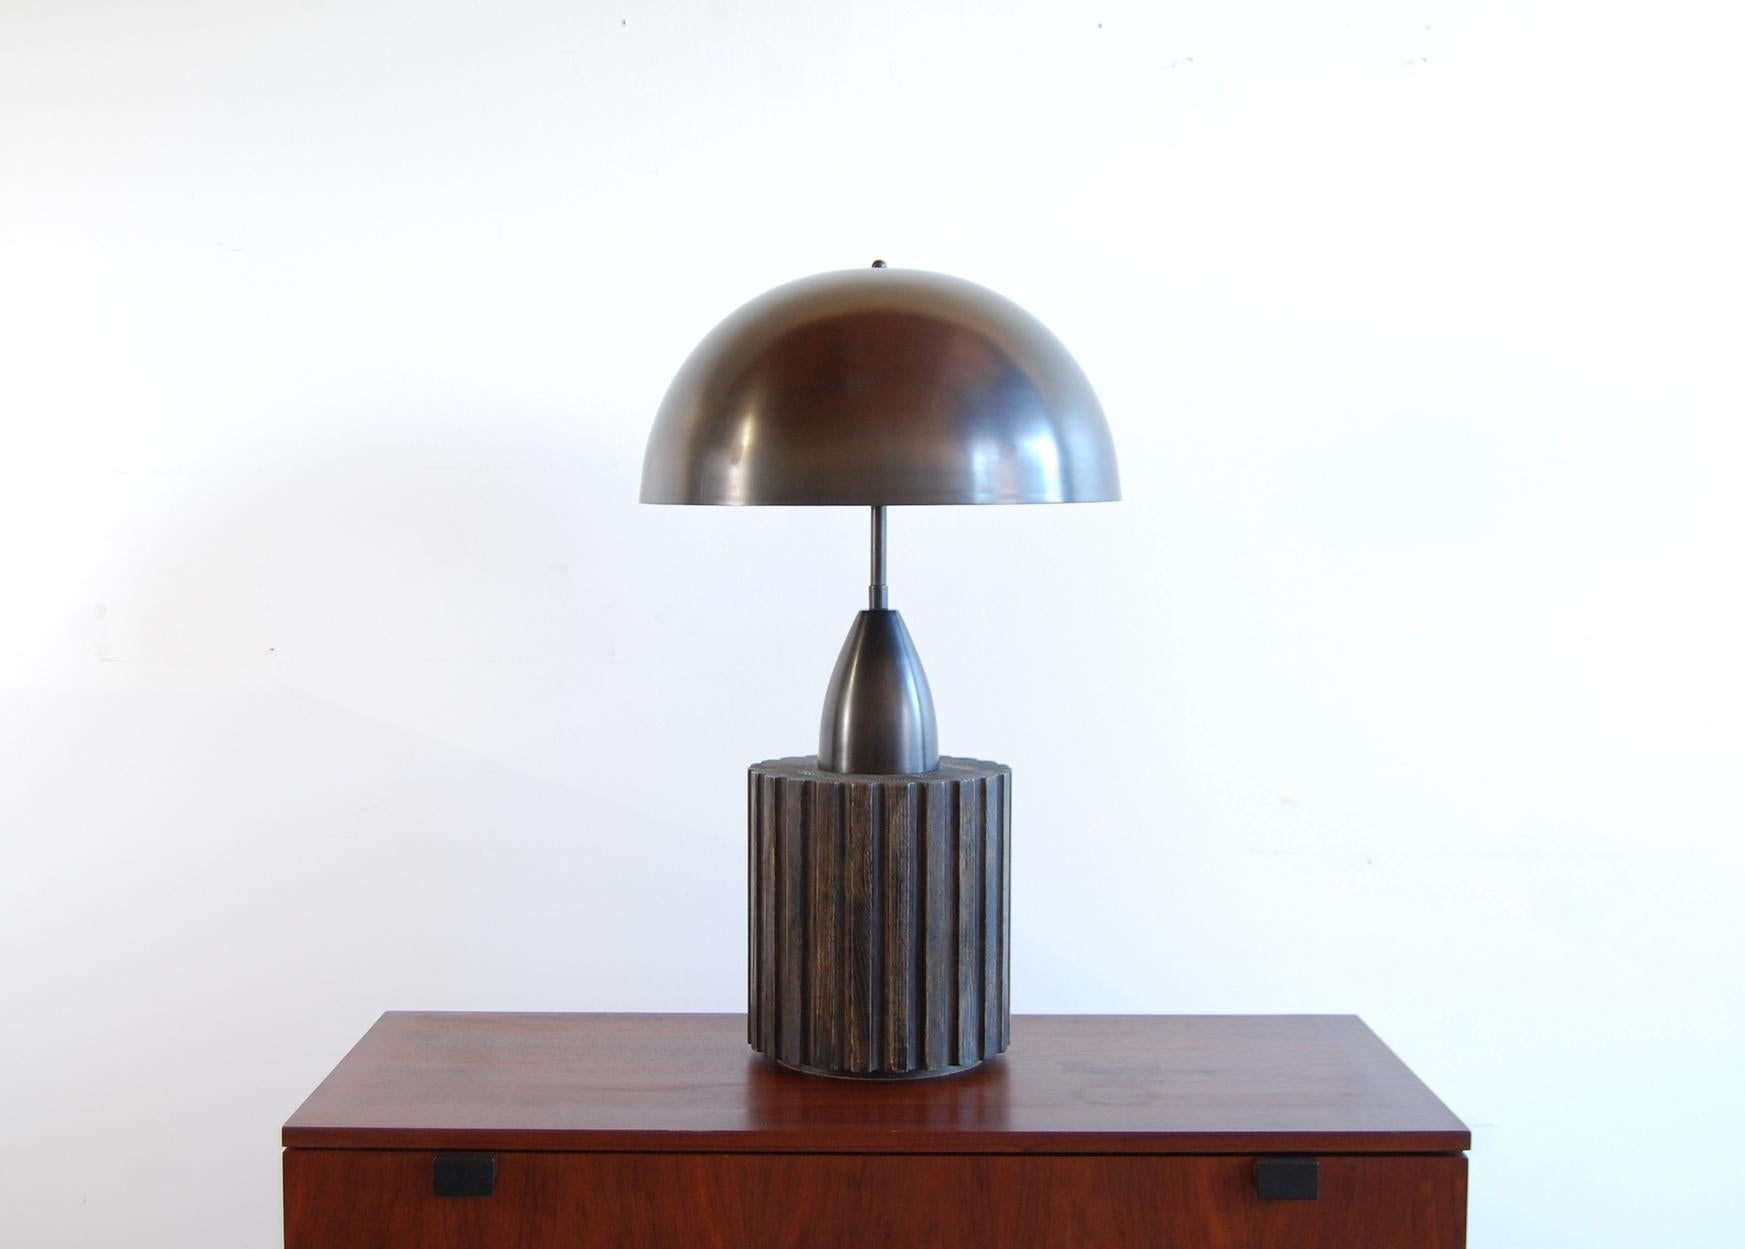 Large table lamp by Apparatus Studio, New York City. Solid, patinated brass, with a fluted solid oak base. 24